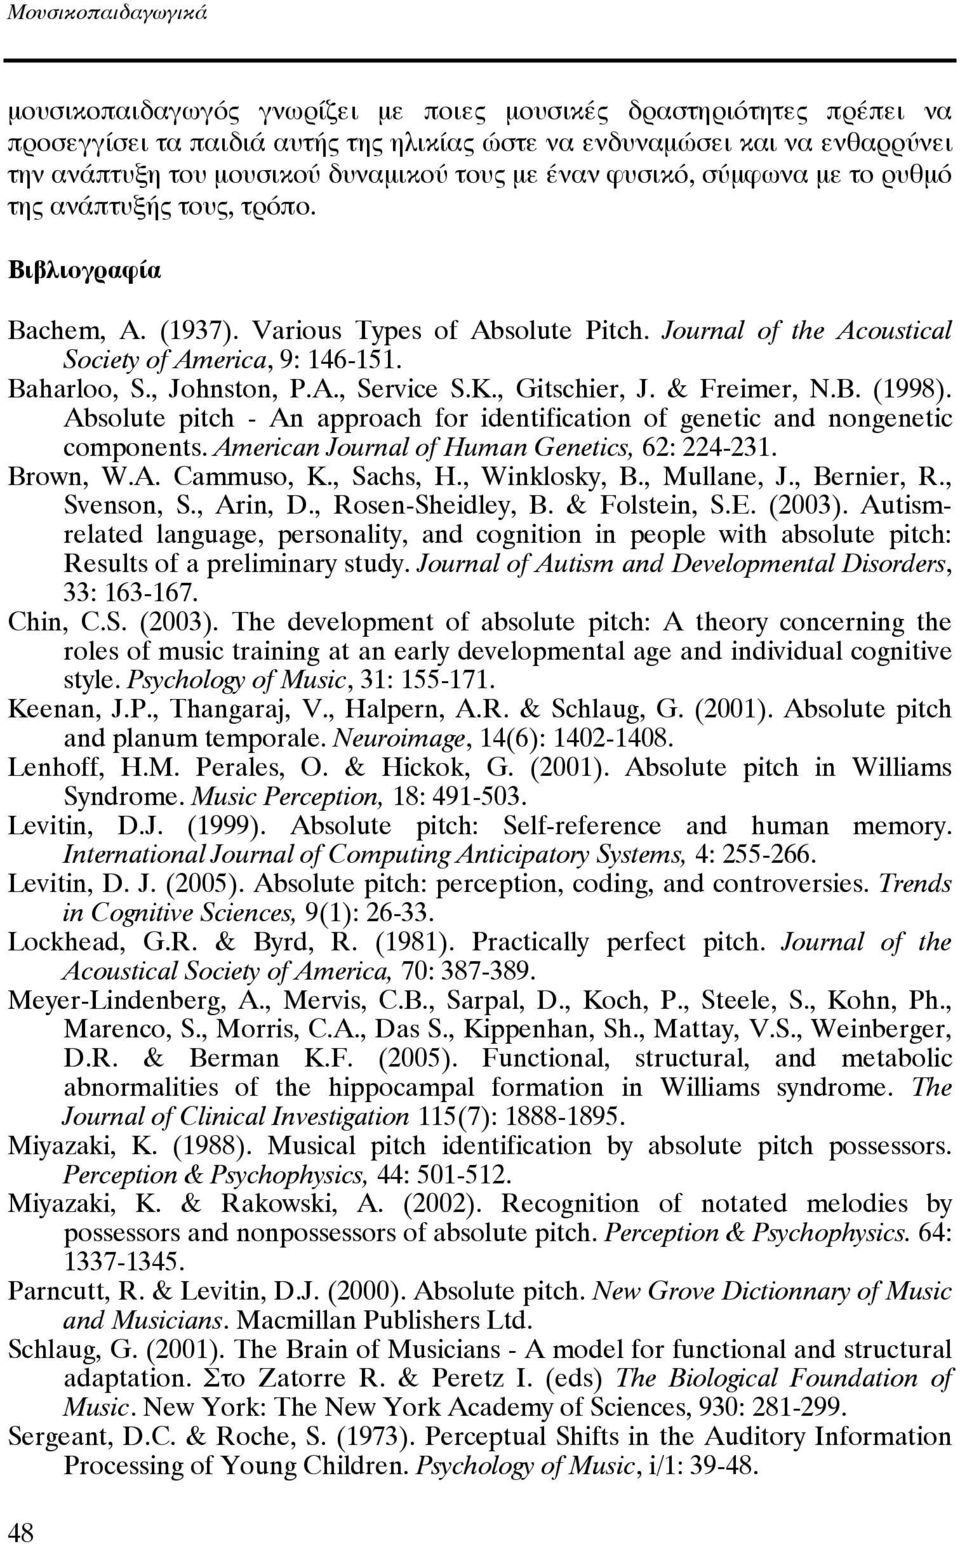 Baharloo, S., Johnston, P.A., Service S.K., Gitschier, J. & Freimer, N.B. (1998). Absolute pitch - An approach for identification of genetic and nongenetic components.